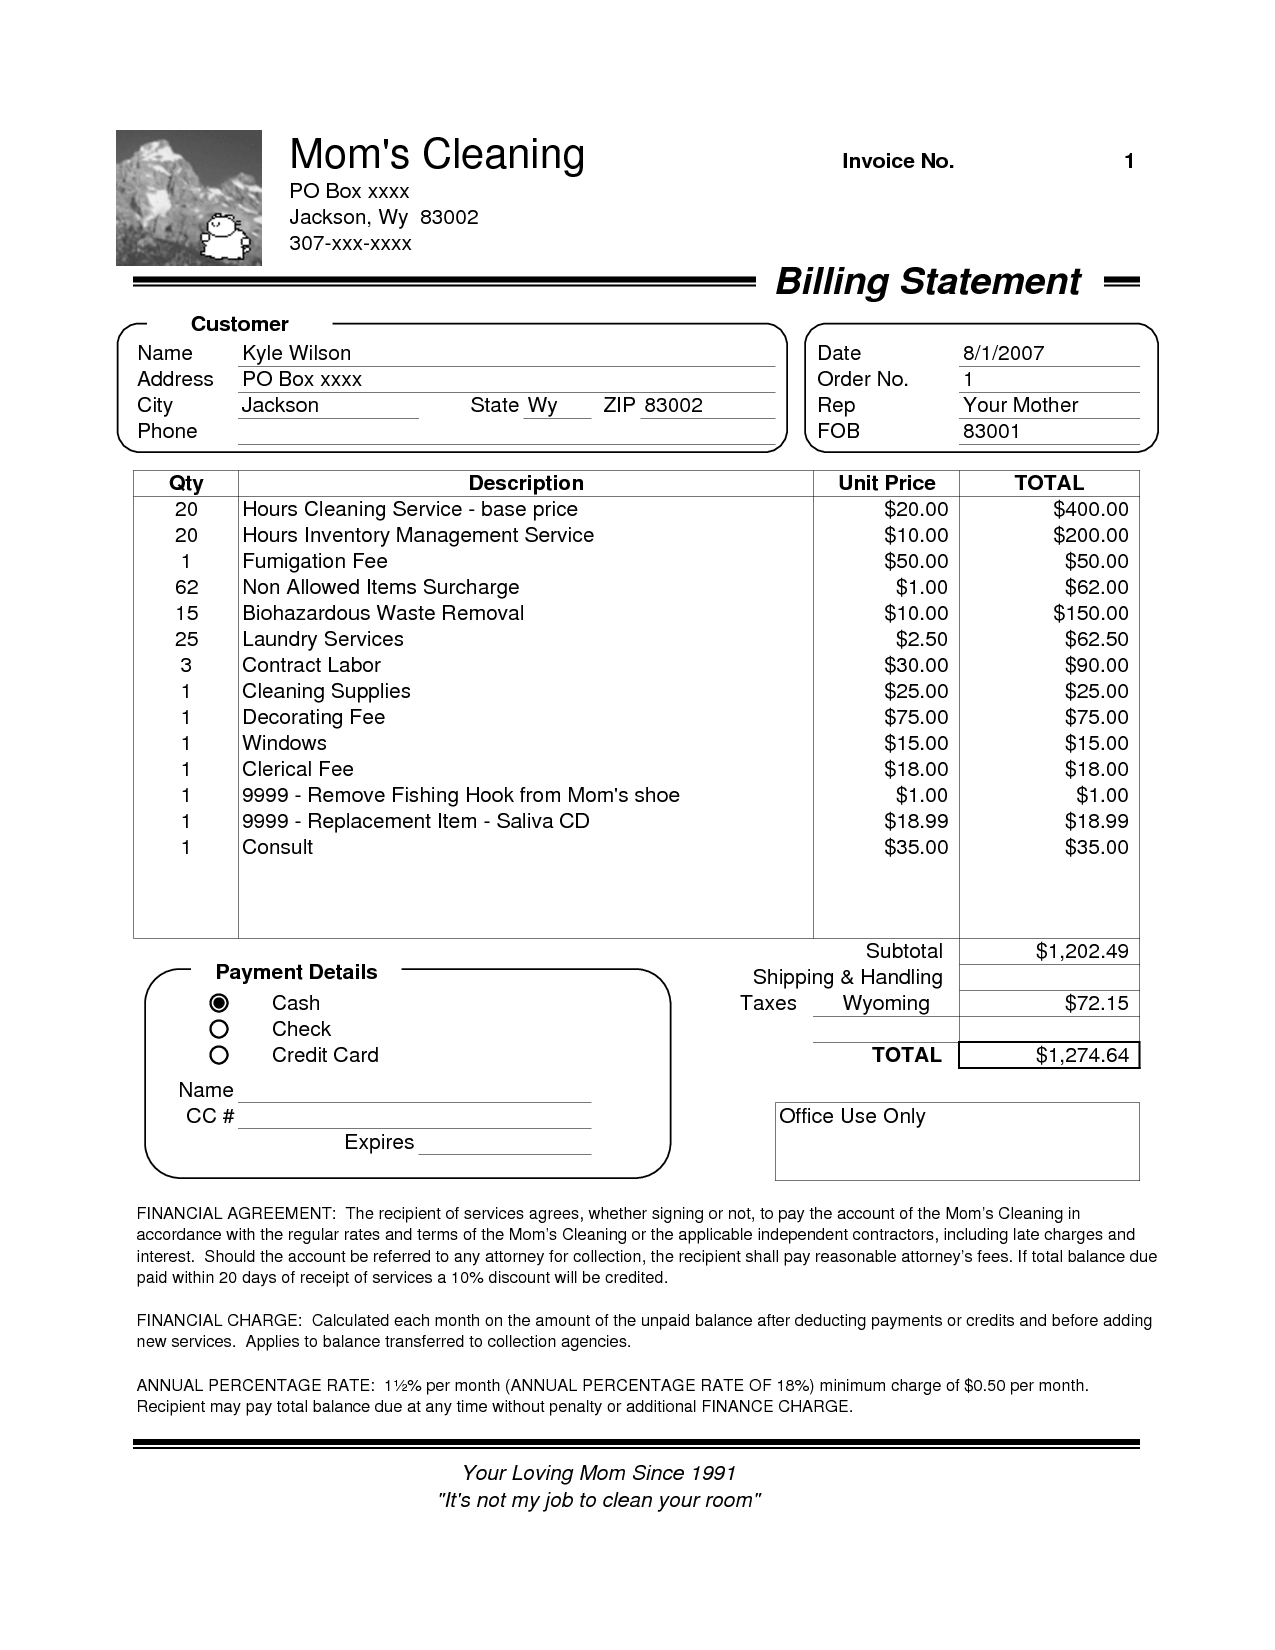 cleaning services invoice sample resume templates cleaning services invoice